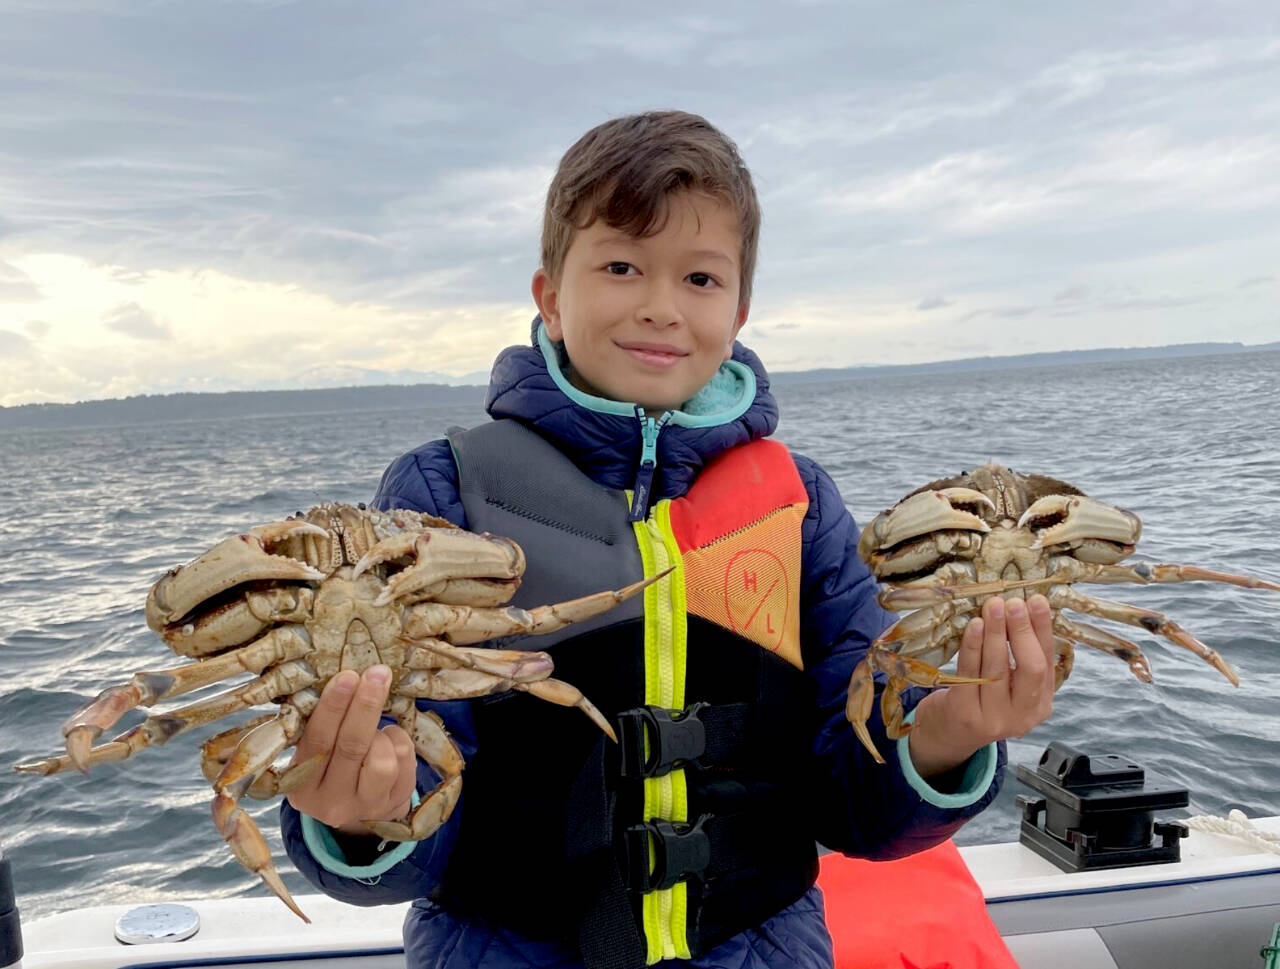 Claire Young/WDFW
A young crabber holds his catch off the coast of Washington.